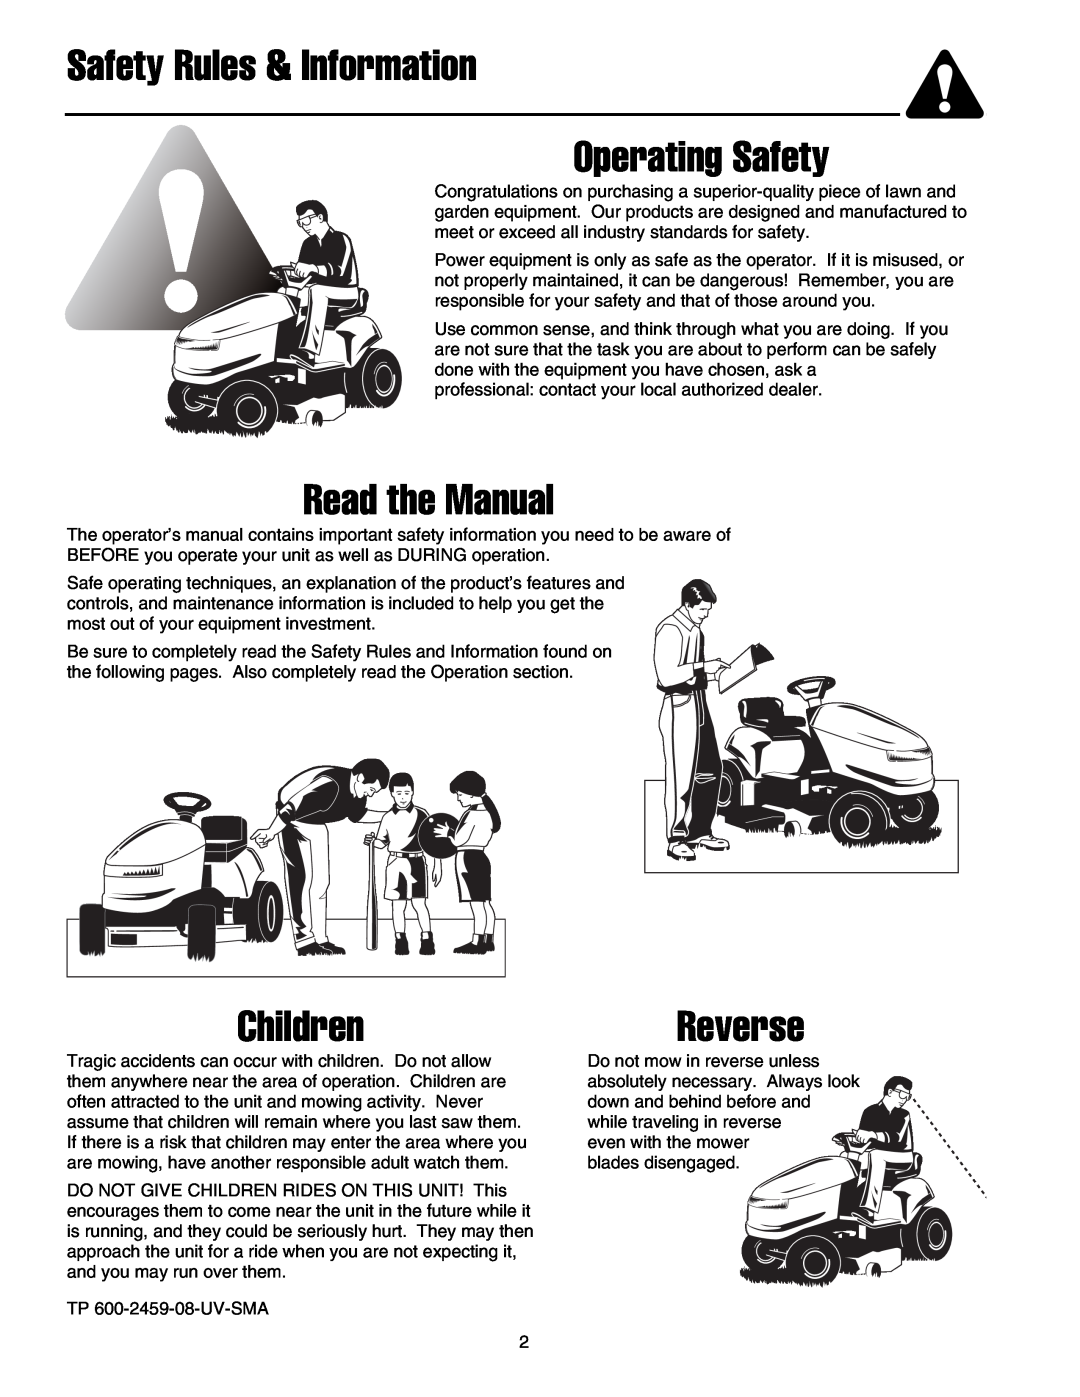 Snapper 1800, 2800, 500, 1700, 2700, 400 Safety Rules & Information Operating Safety, Read the Manual, ChildrenReverse 